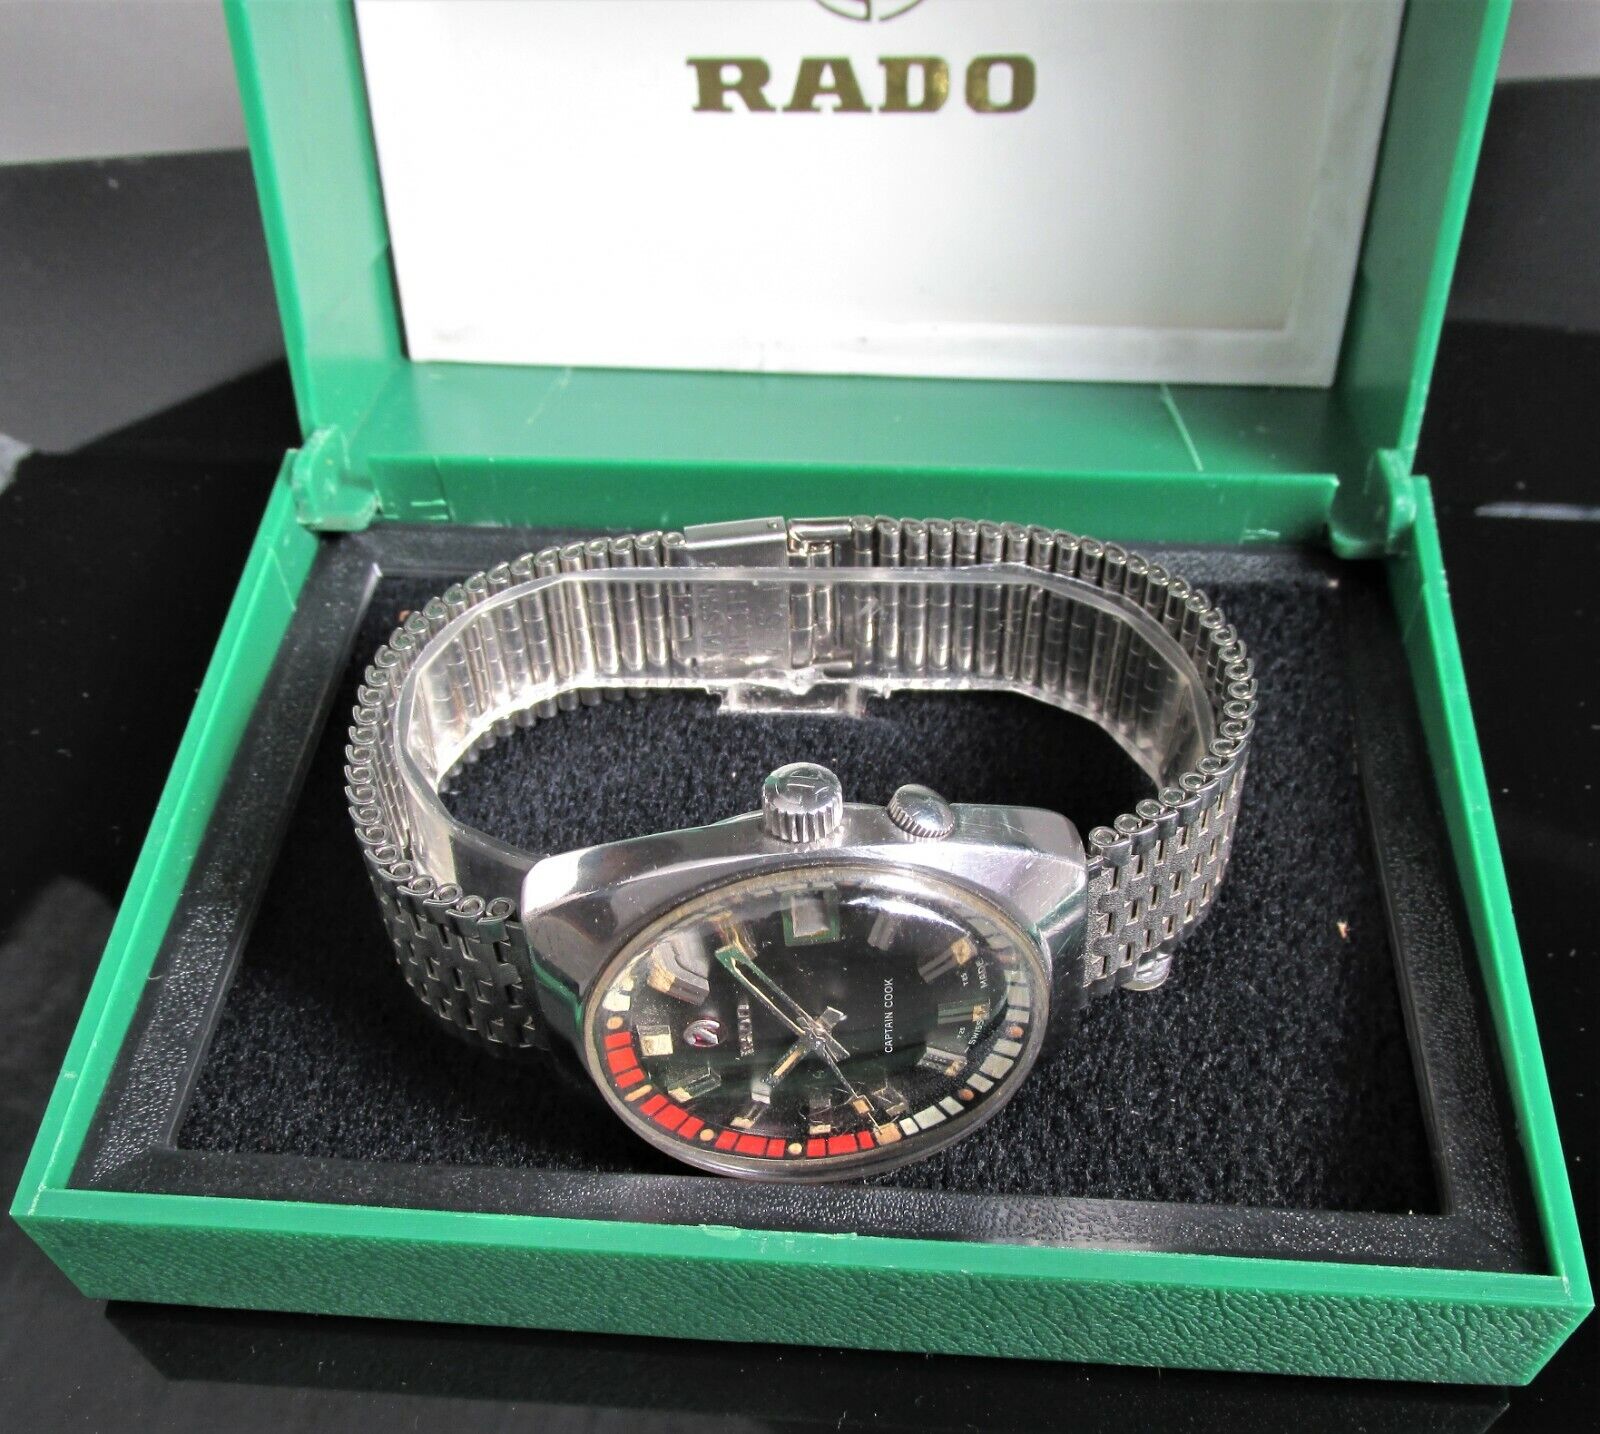 RADO CAPTAIN COOK MKII AUTOMATIC CAL AS1858 REF 11773 SWISS WATCH IN BOX Ca 1970